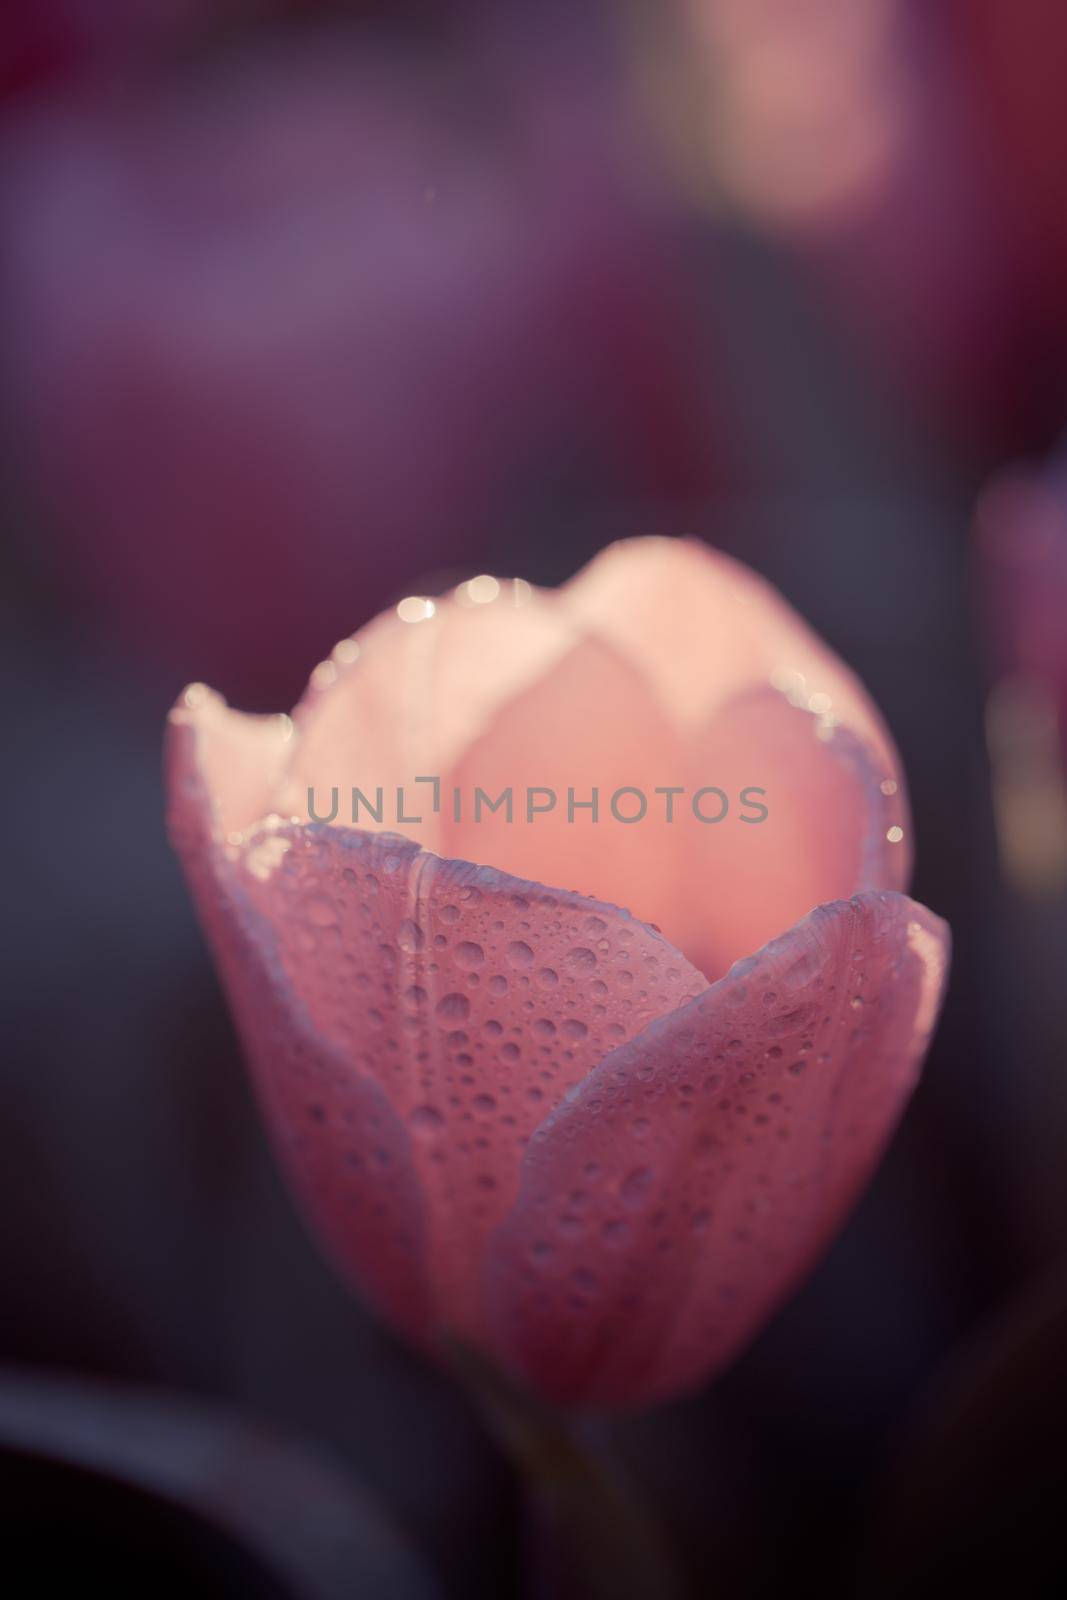 Red white Tulip flower in close up by piyato